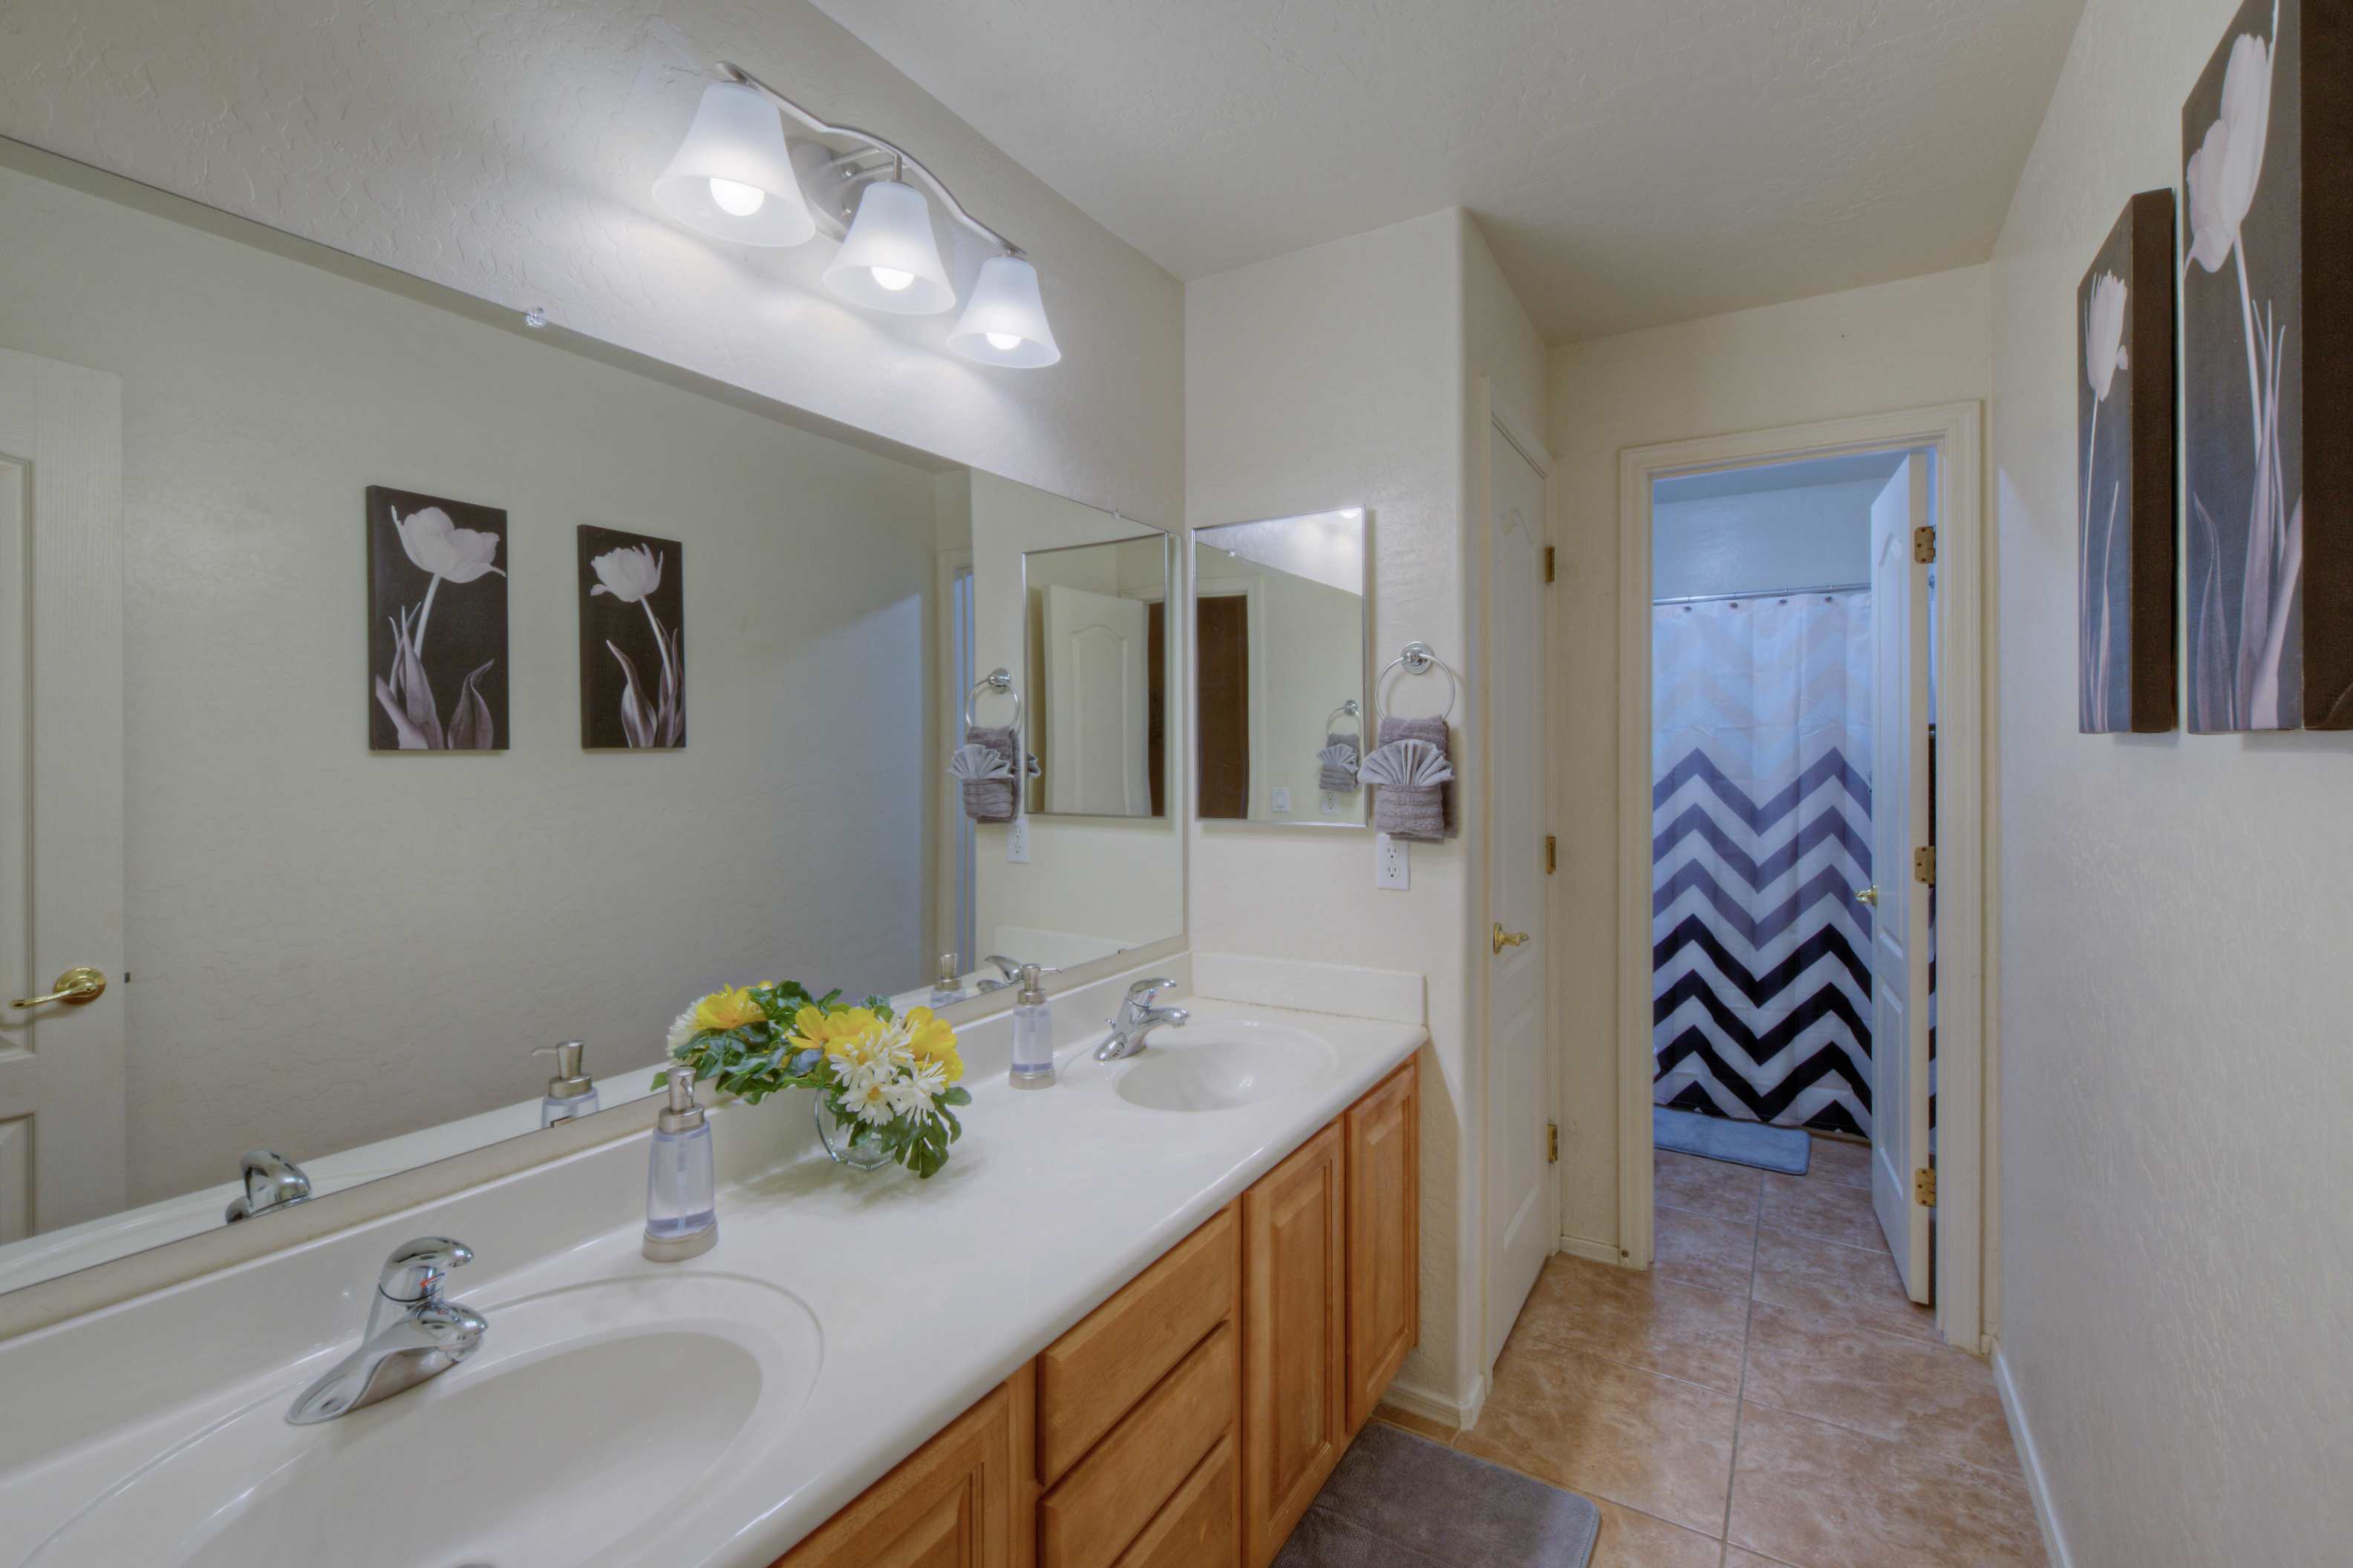 Second bathroom with dual vanity sinks is on the second floor and shared between second and third bedrooms.